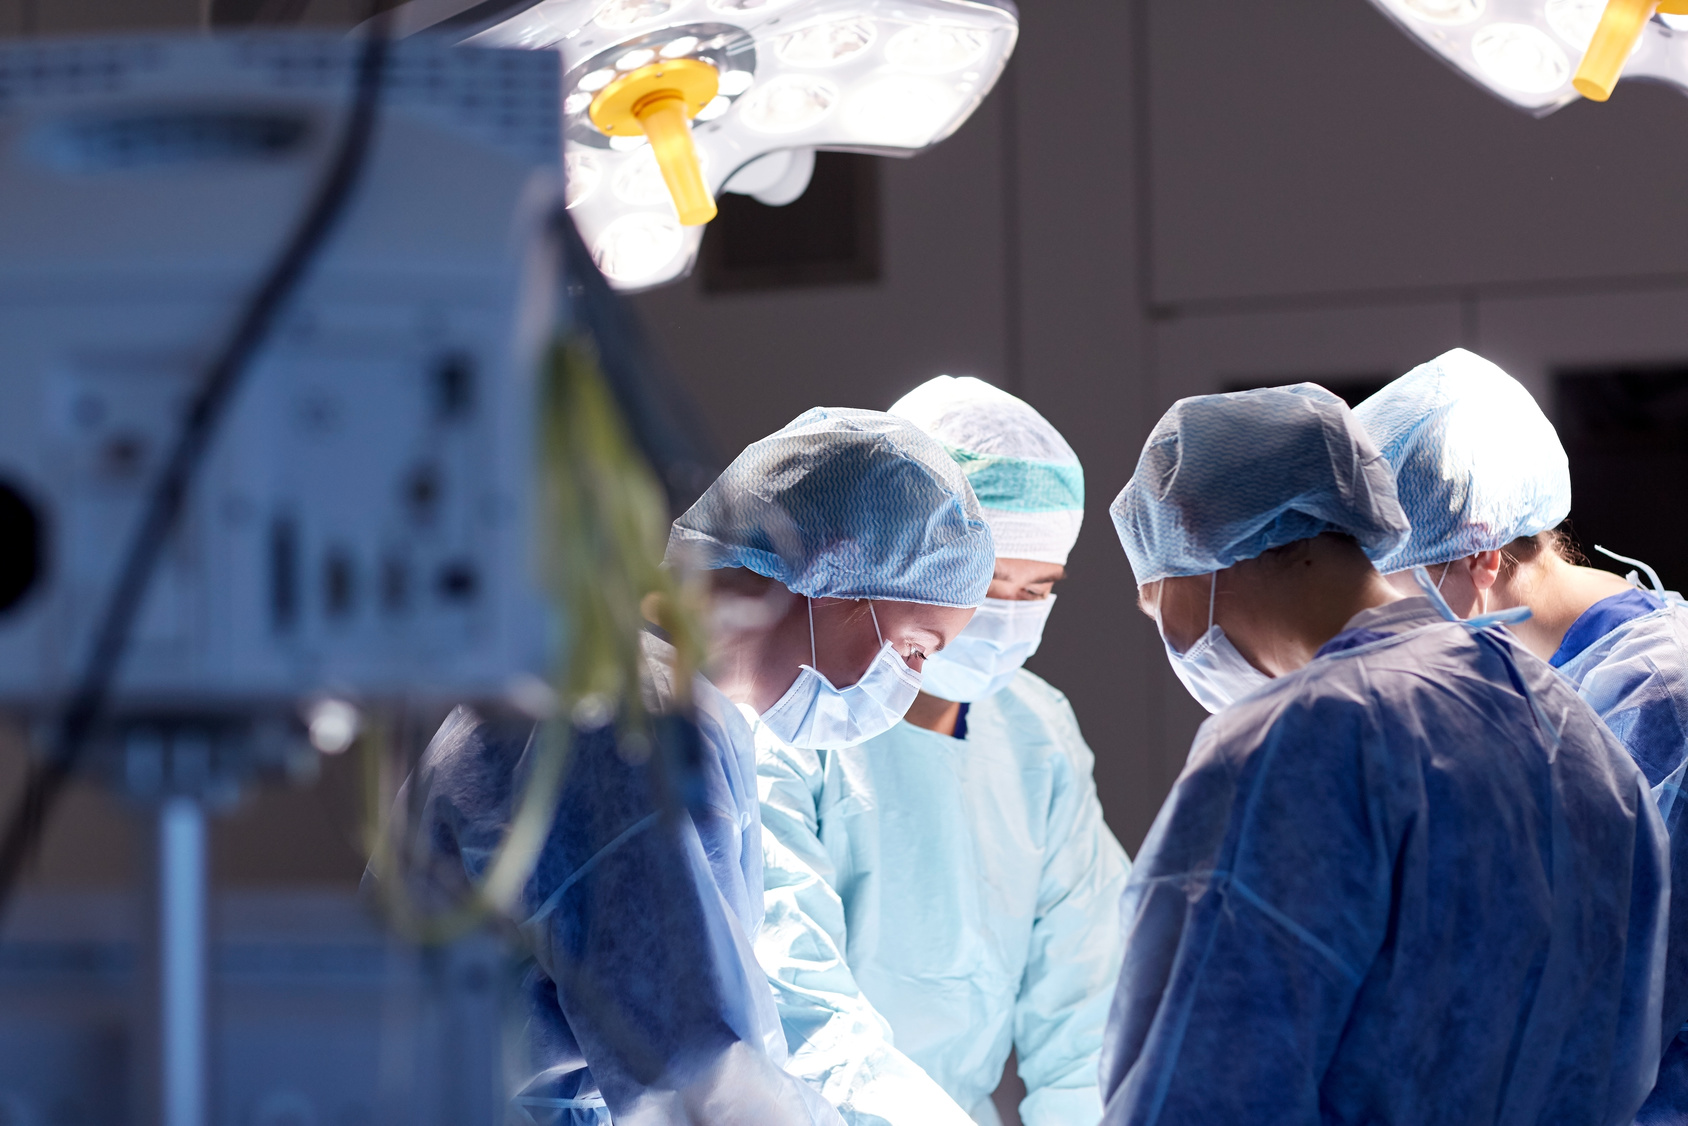 Do “Rude” Surgeons See Worse Patient Outcomes?